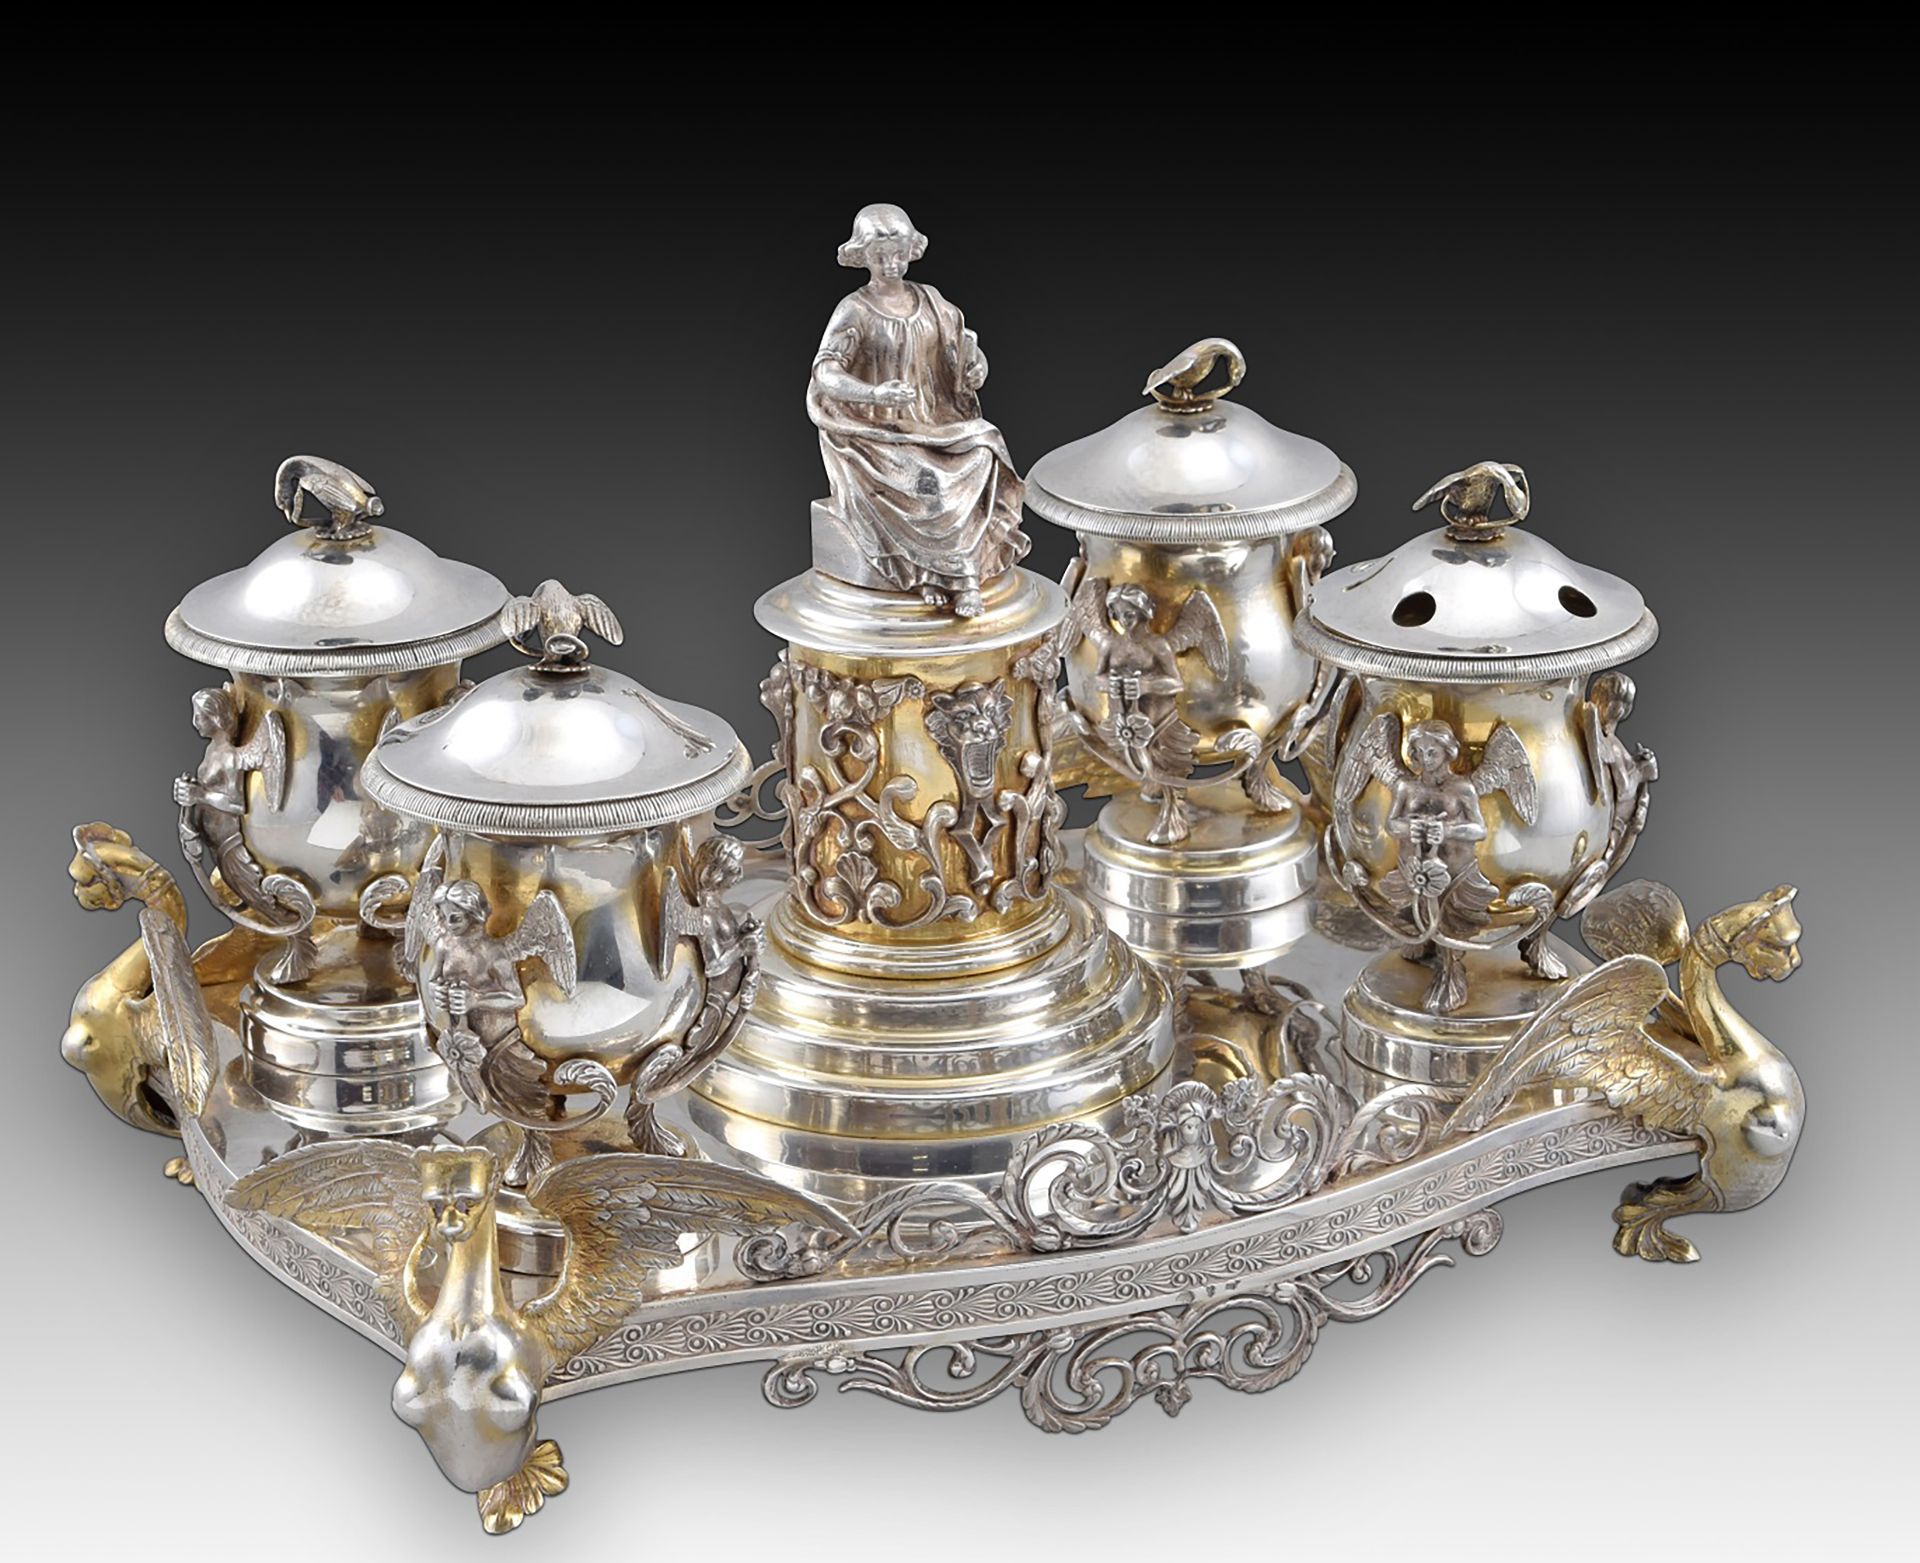 Exceptional Notary Office with four inkwells. Silver. Spain, late 19th century. With contrast markin